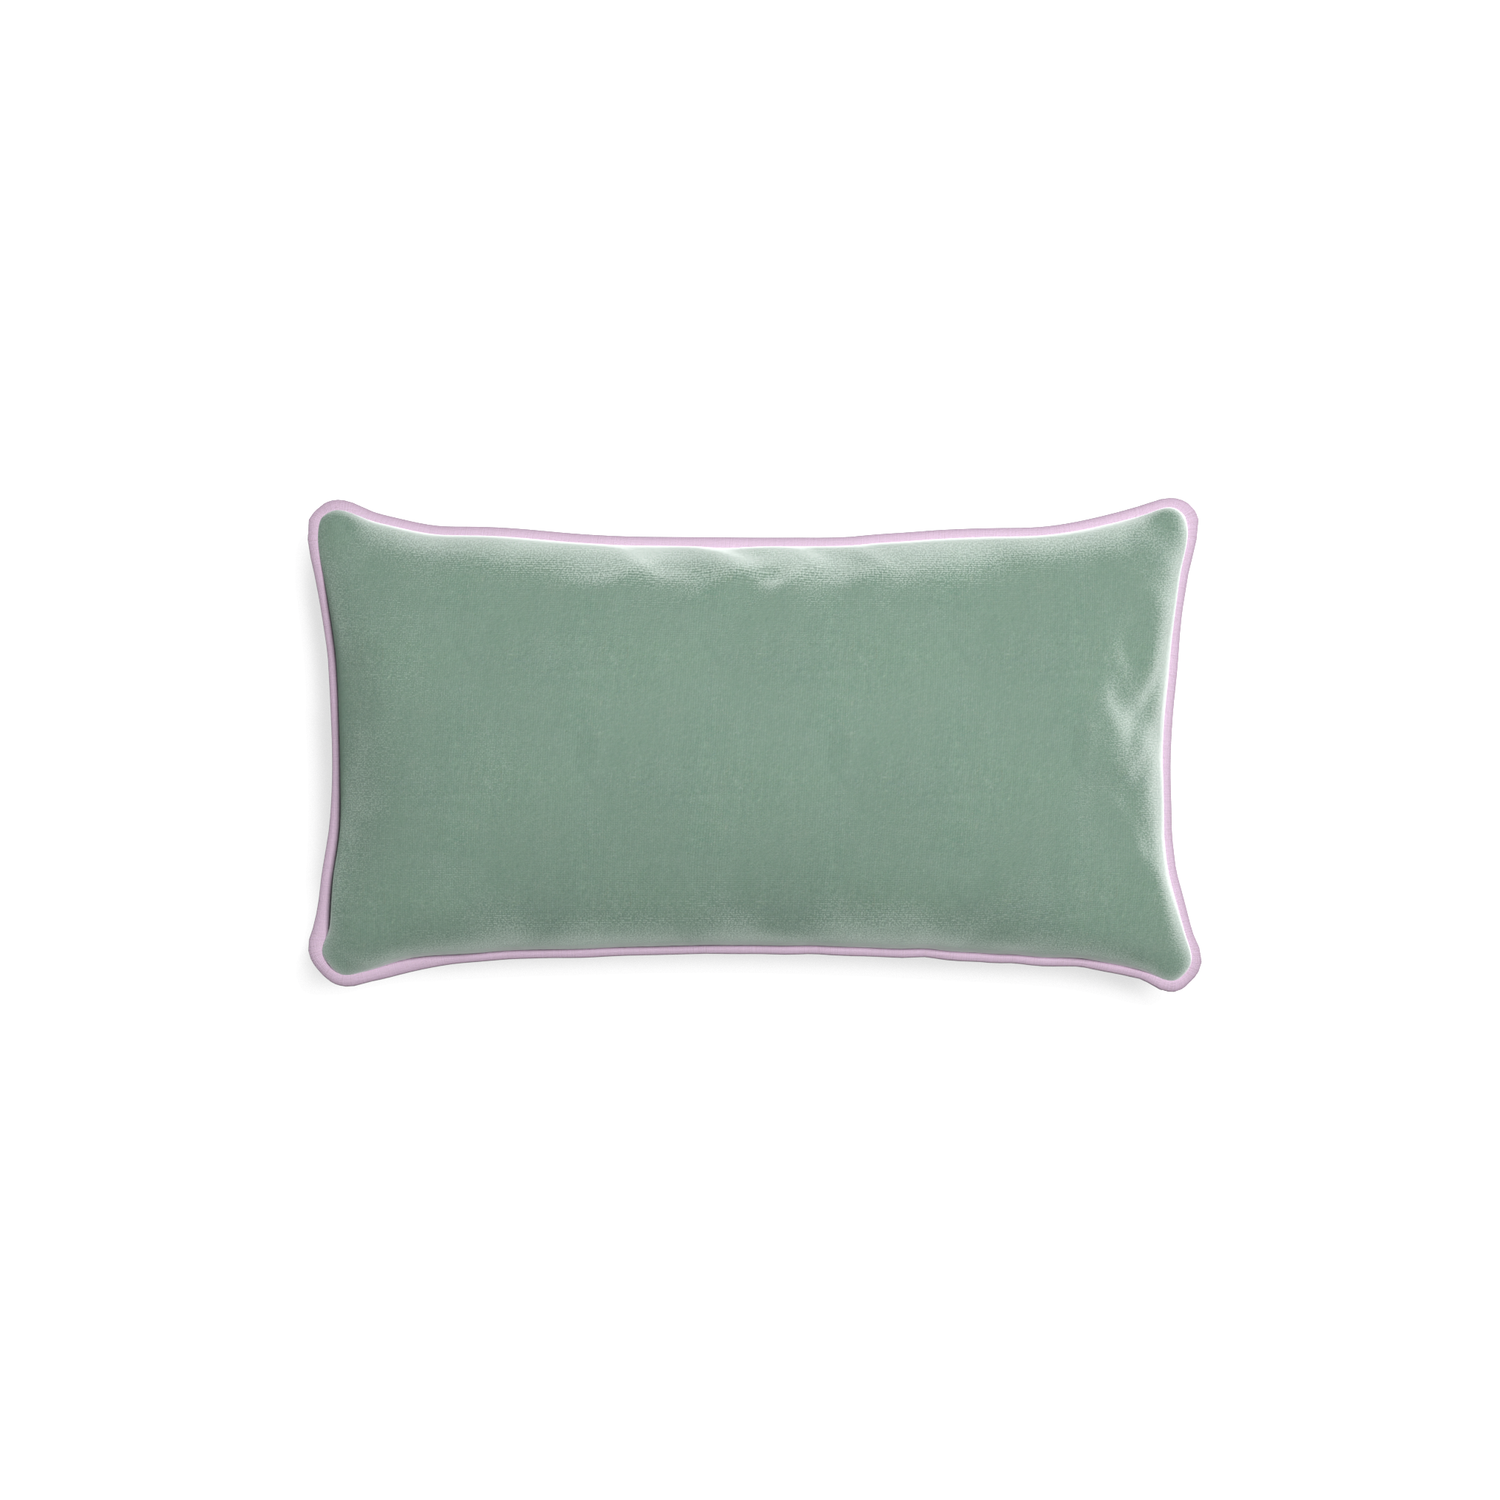 rectangle blue green velvet pillow with lilac piping